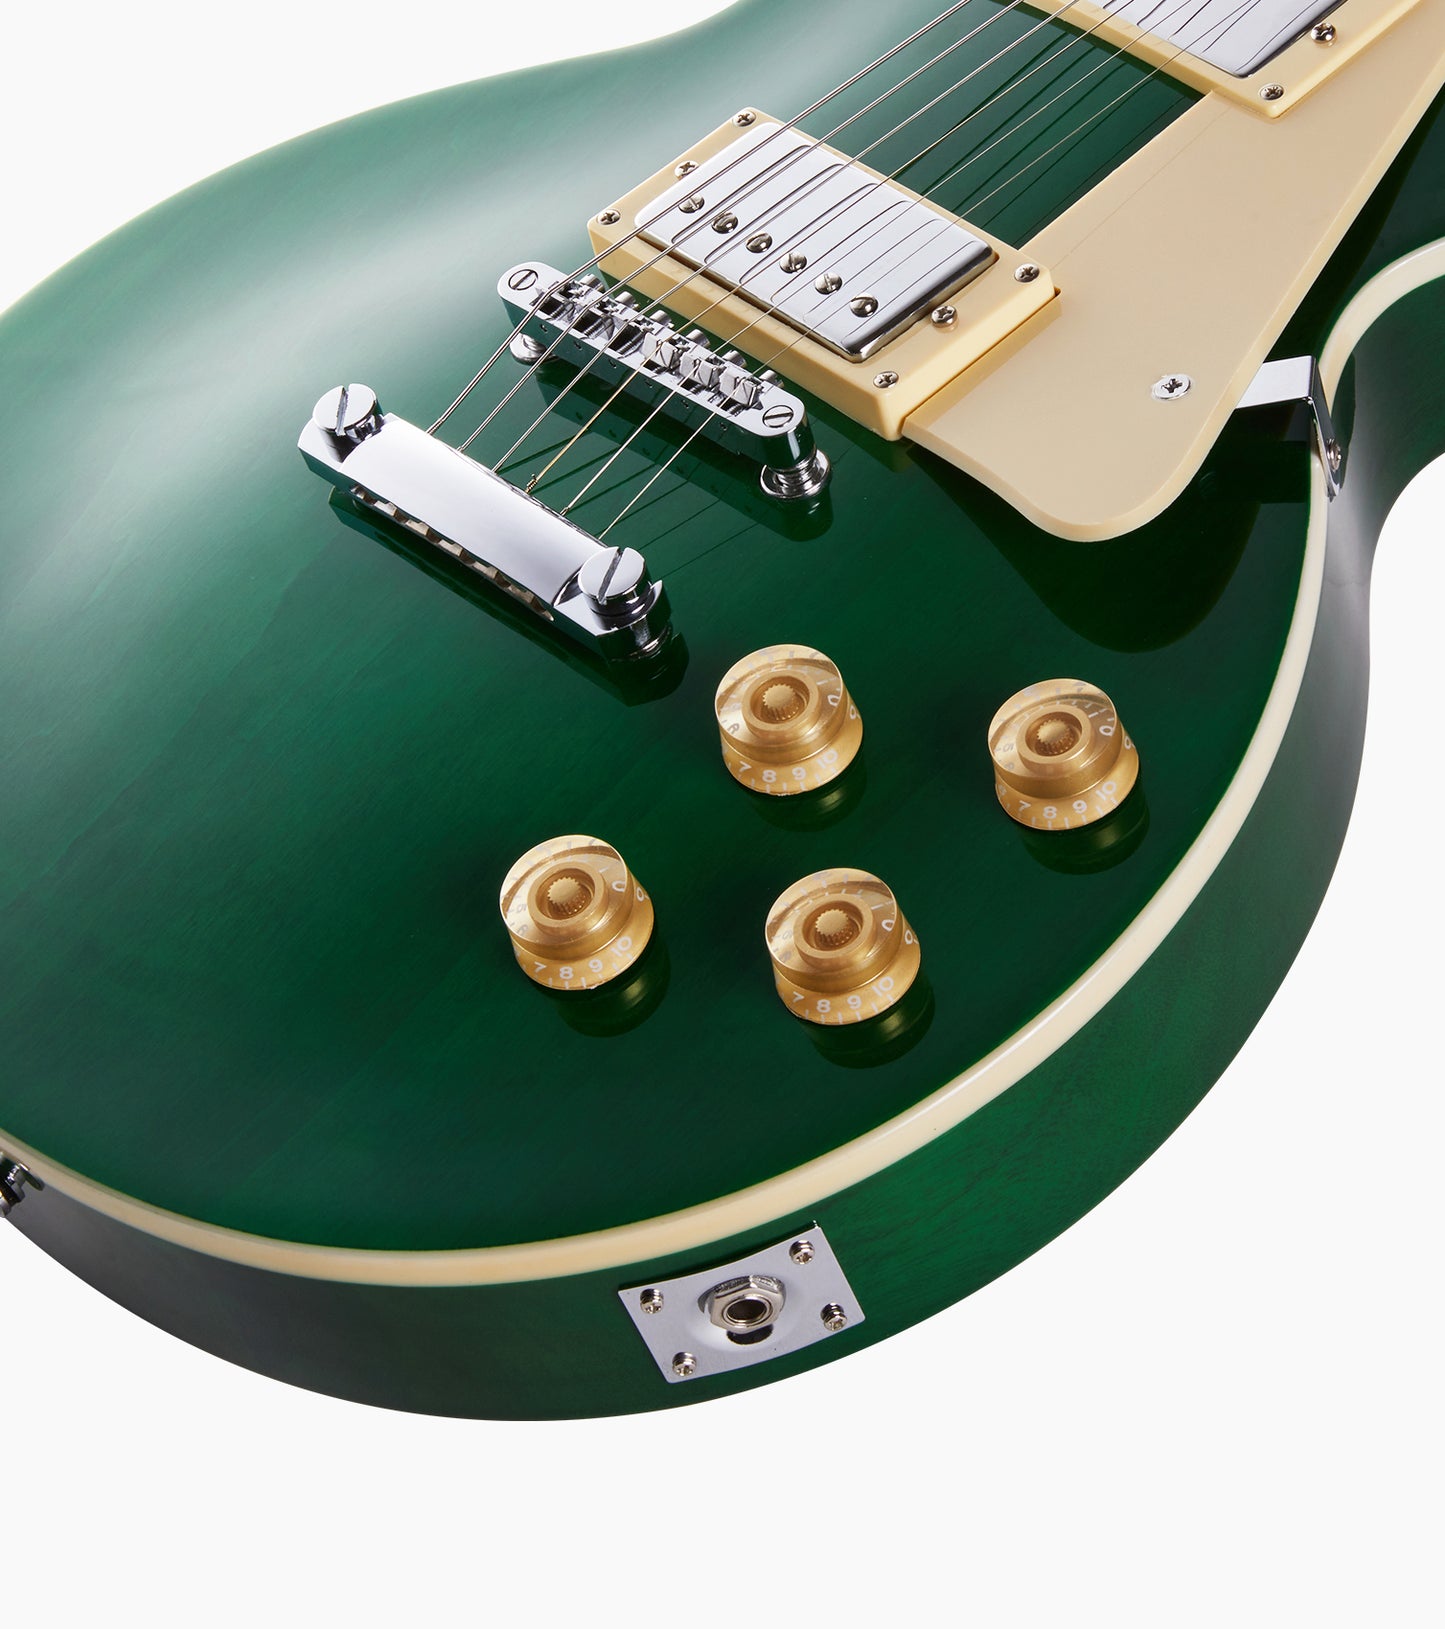 39 inch Les Paul Electric Guitar in Green - Output Jack and Controls